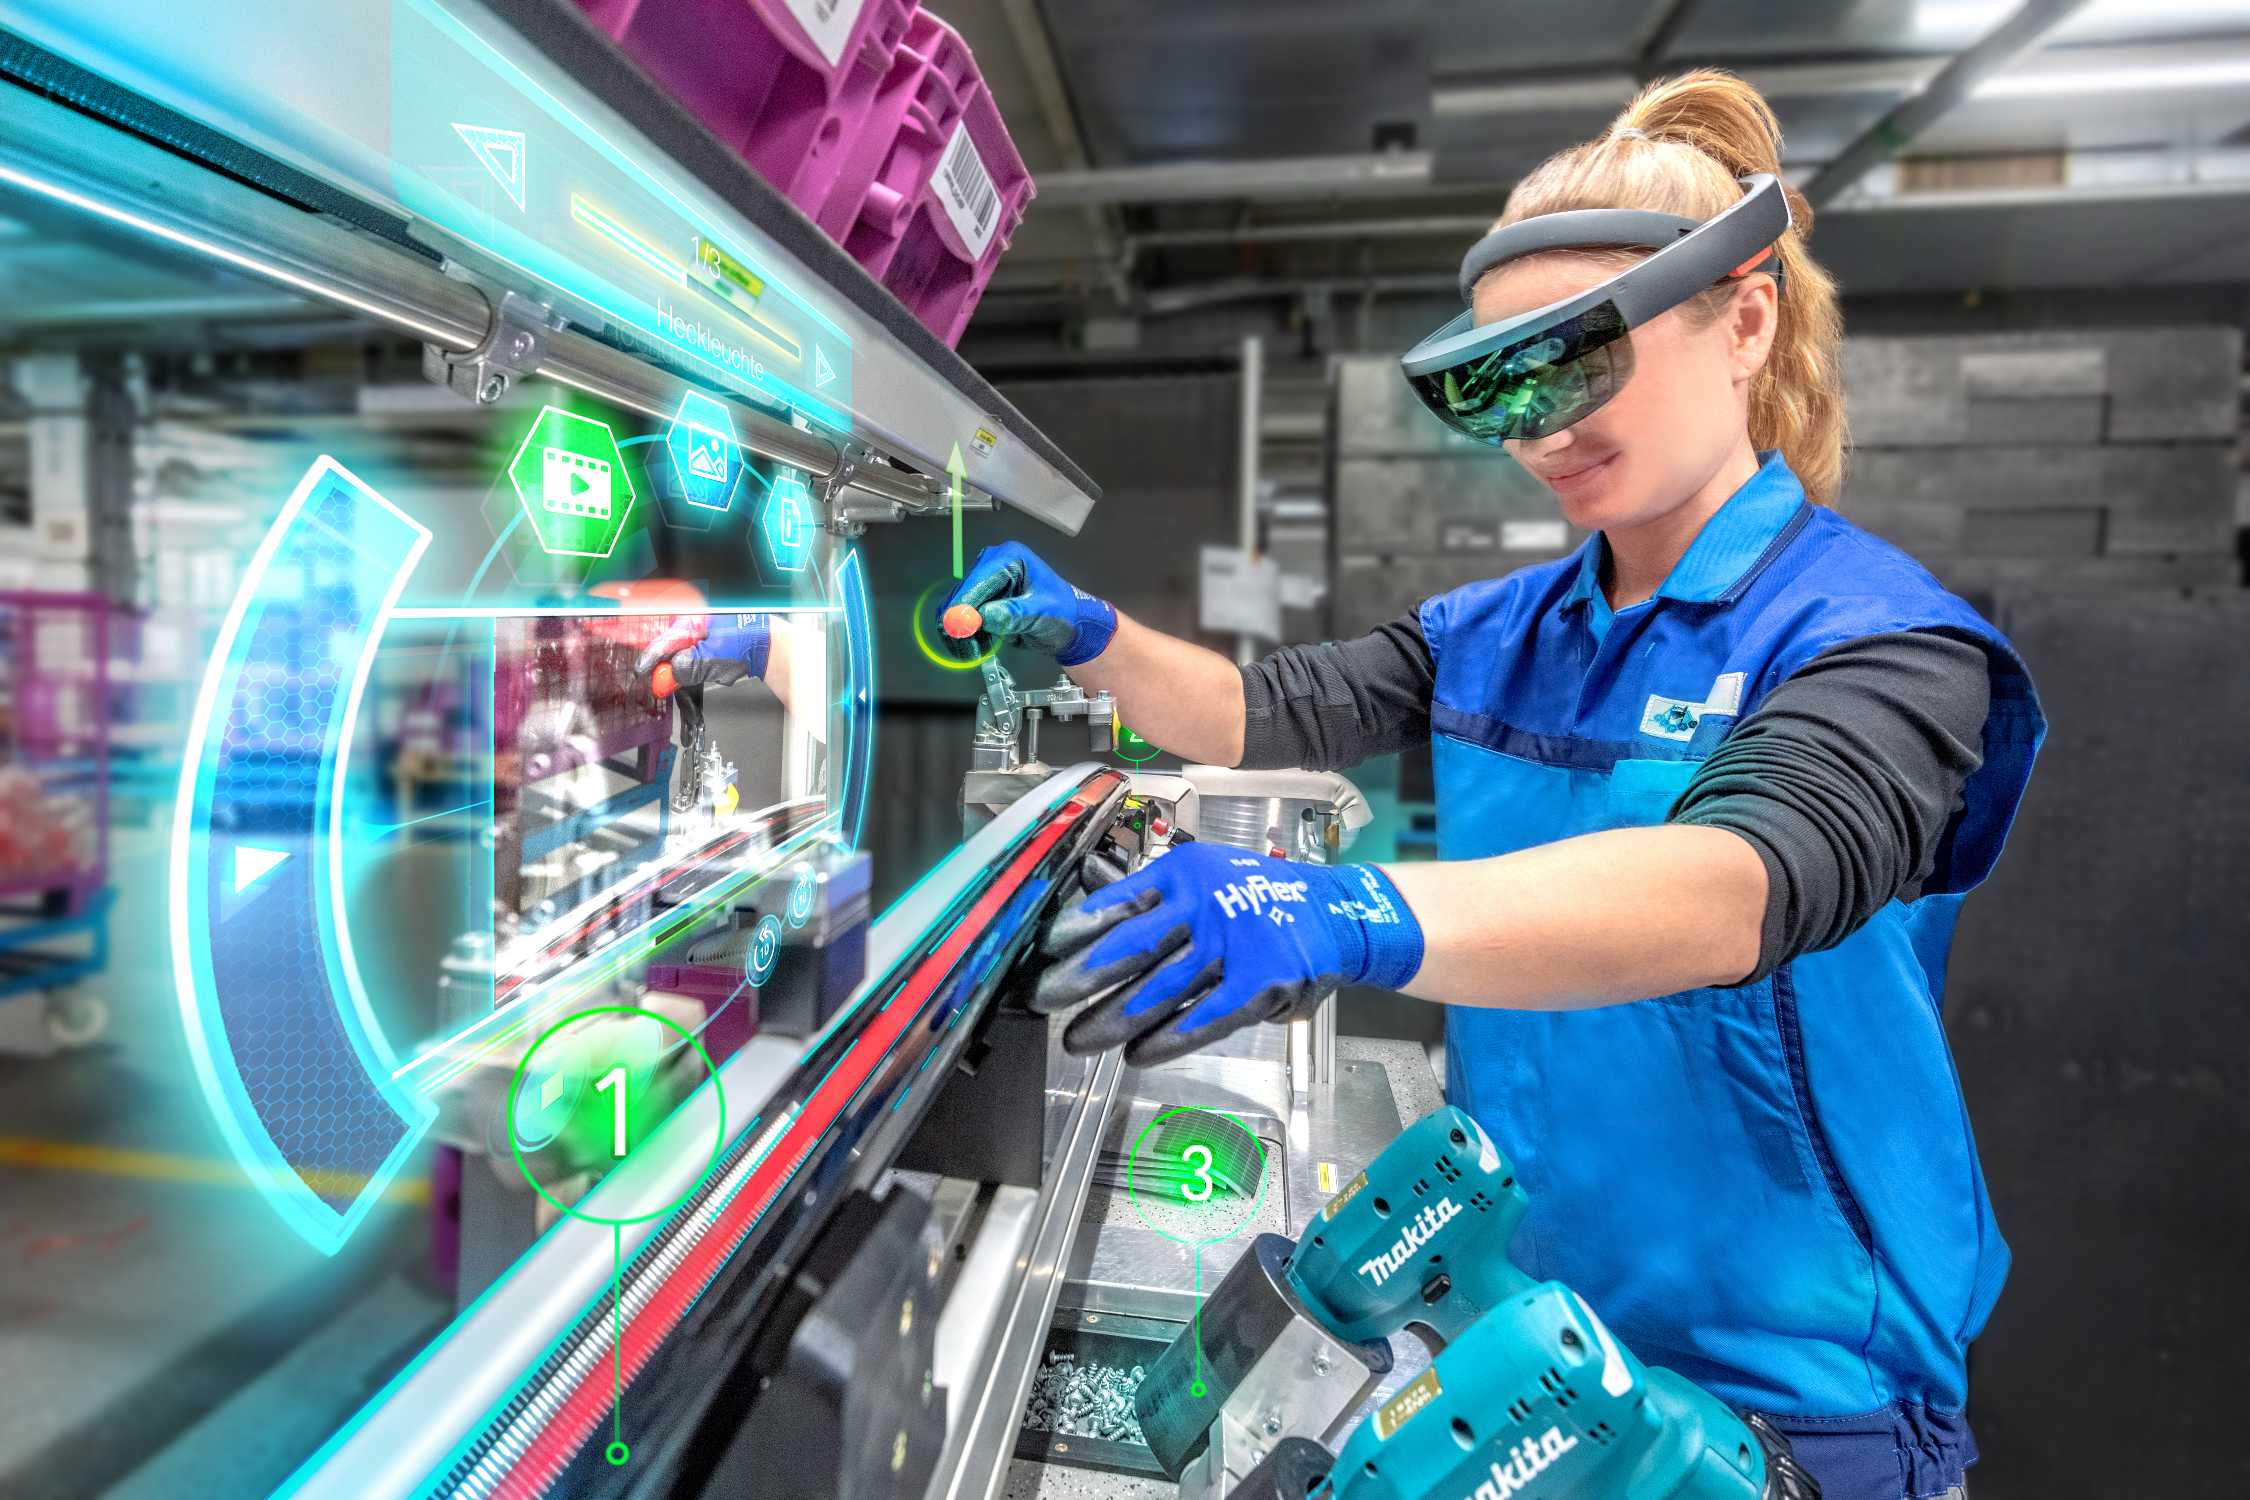 Training new staff is supported by augmented-reality glasses and virtual assistance at the assembly training centre of BMW Group Plant Dingolfing (04/2019).